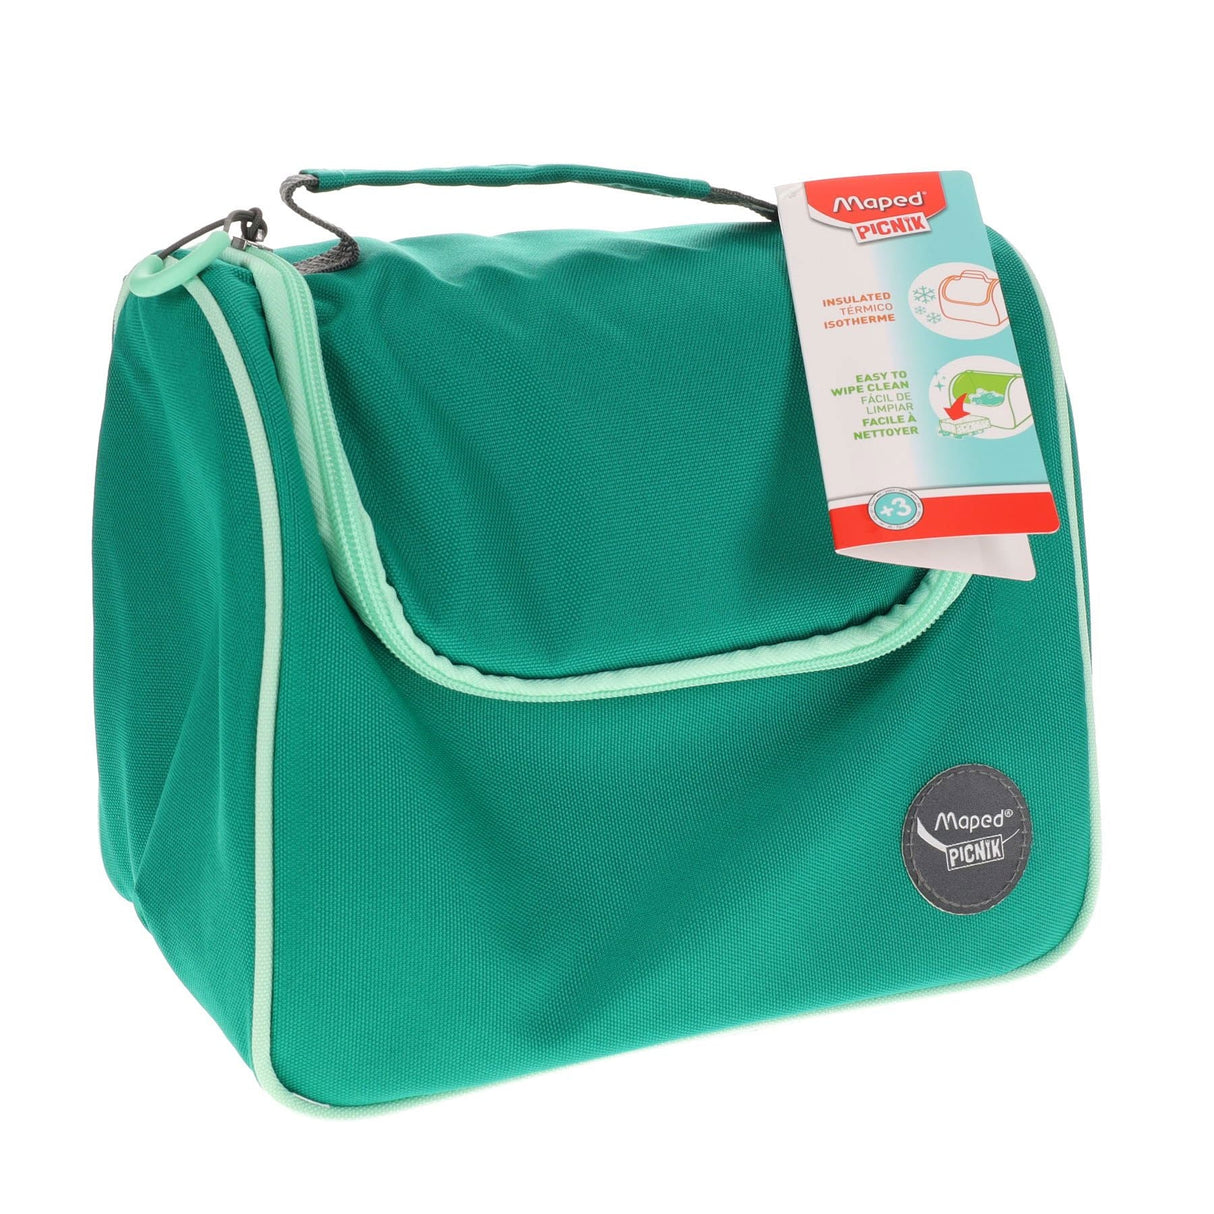 Maped Picnik Lunch Bag - Green-Lunch Bags- Buy Online at Stationery Shop UK